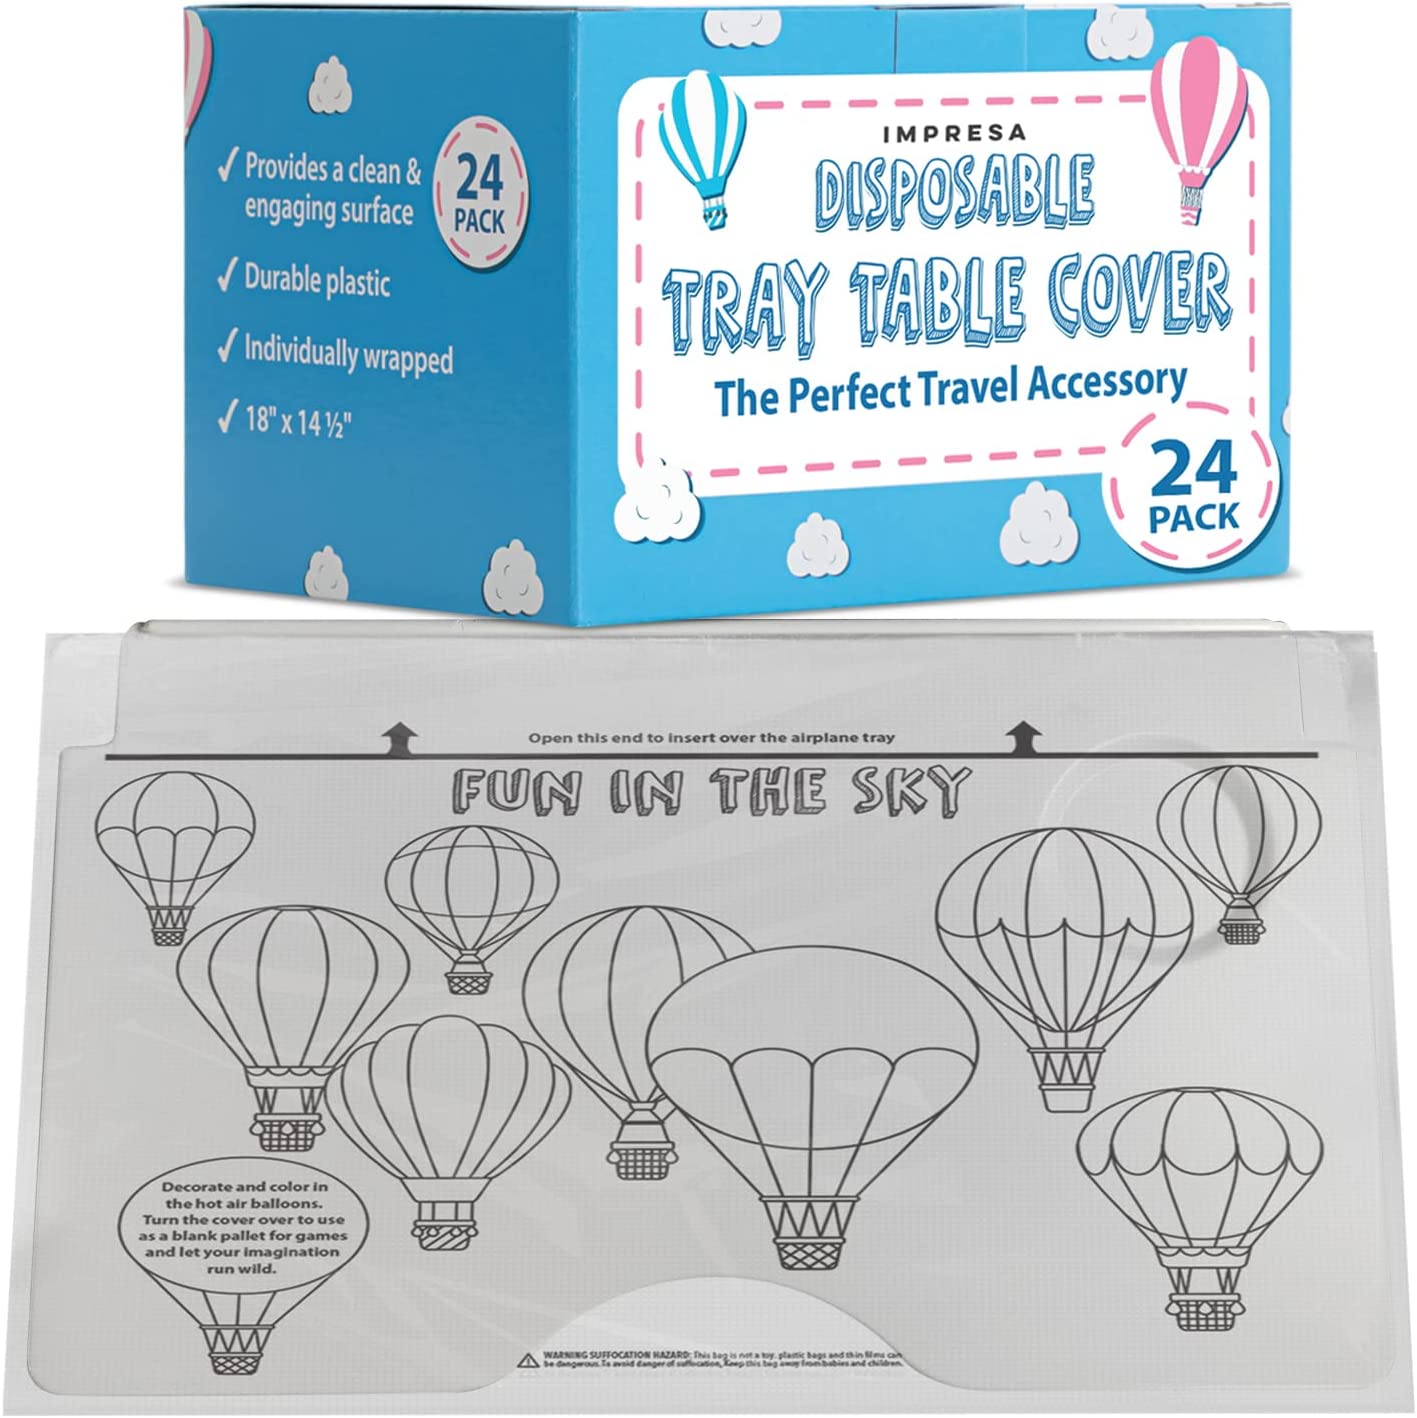 24 Pack] Disposable Airplane Tray Cover - Interactive Airplane